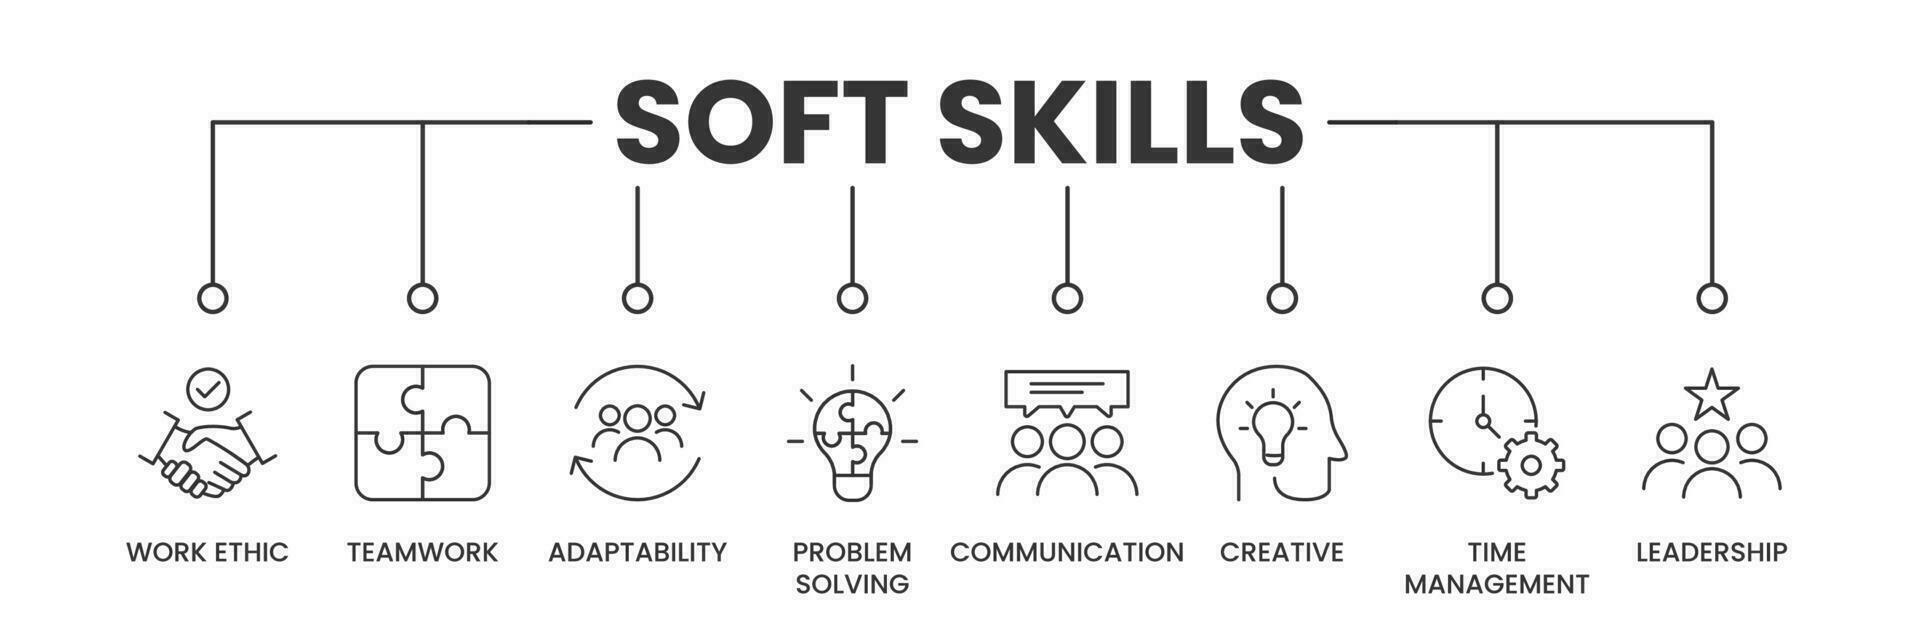 Soft Skills banner with icons. Outline icons of Work Ethic, Teamwork, Adaptability, Problem Solving, Communication, Creativity, Time Management, and Leadership. Vector Illustration